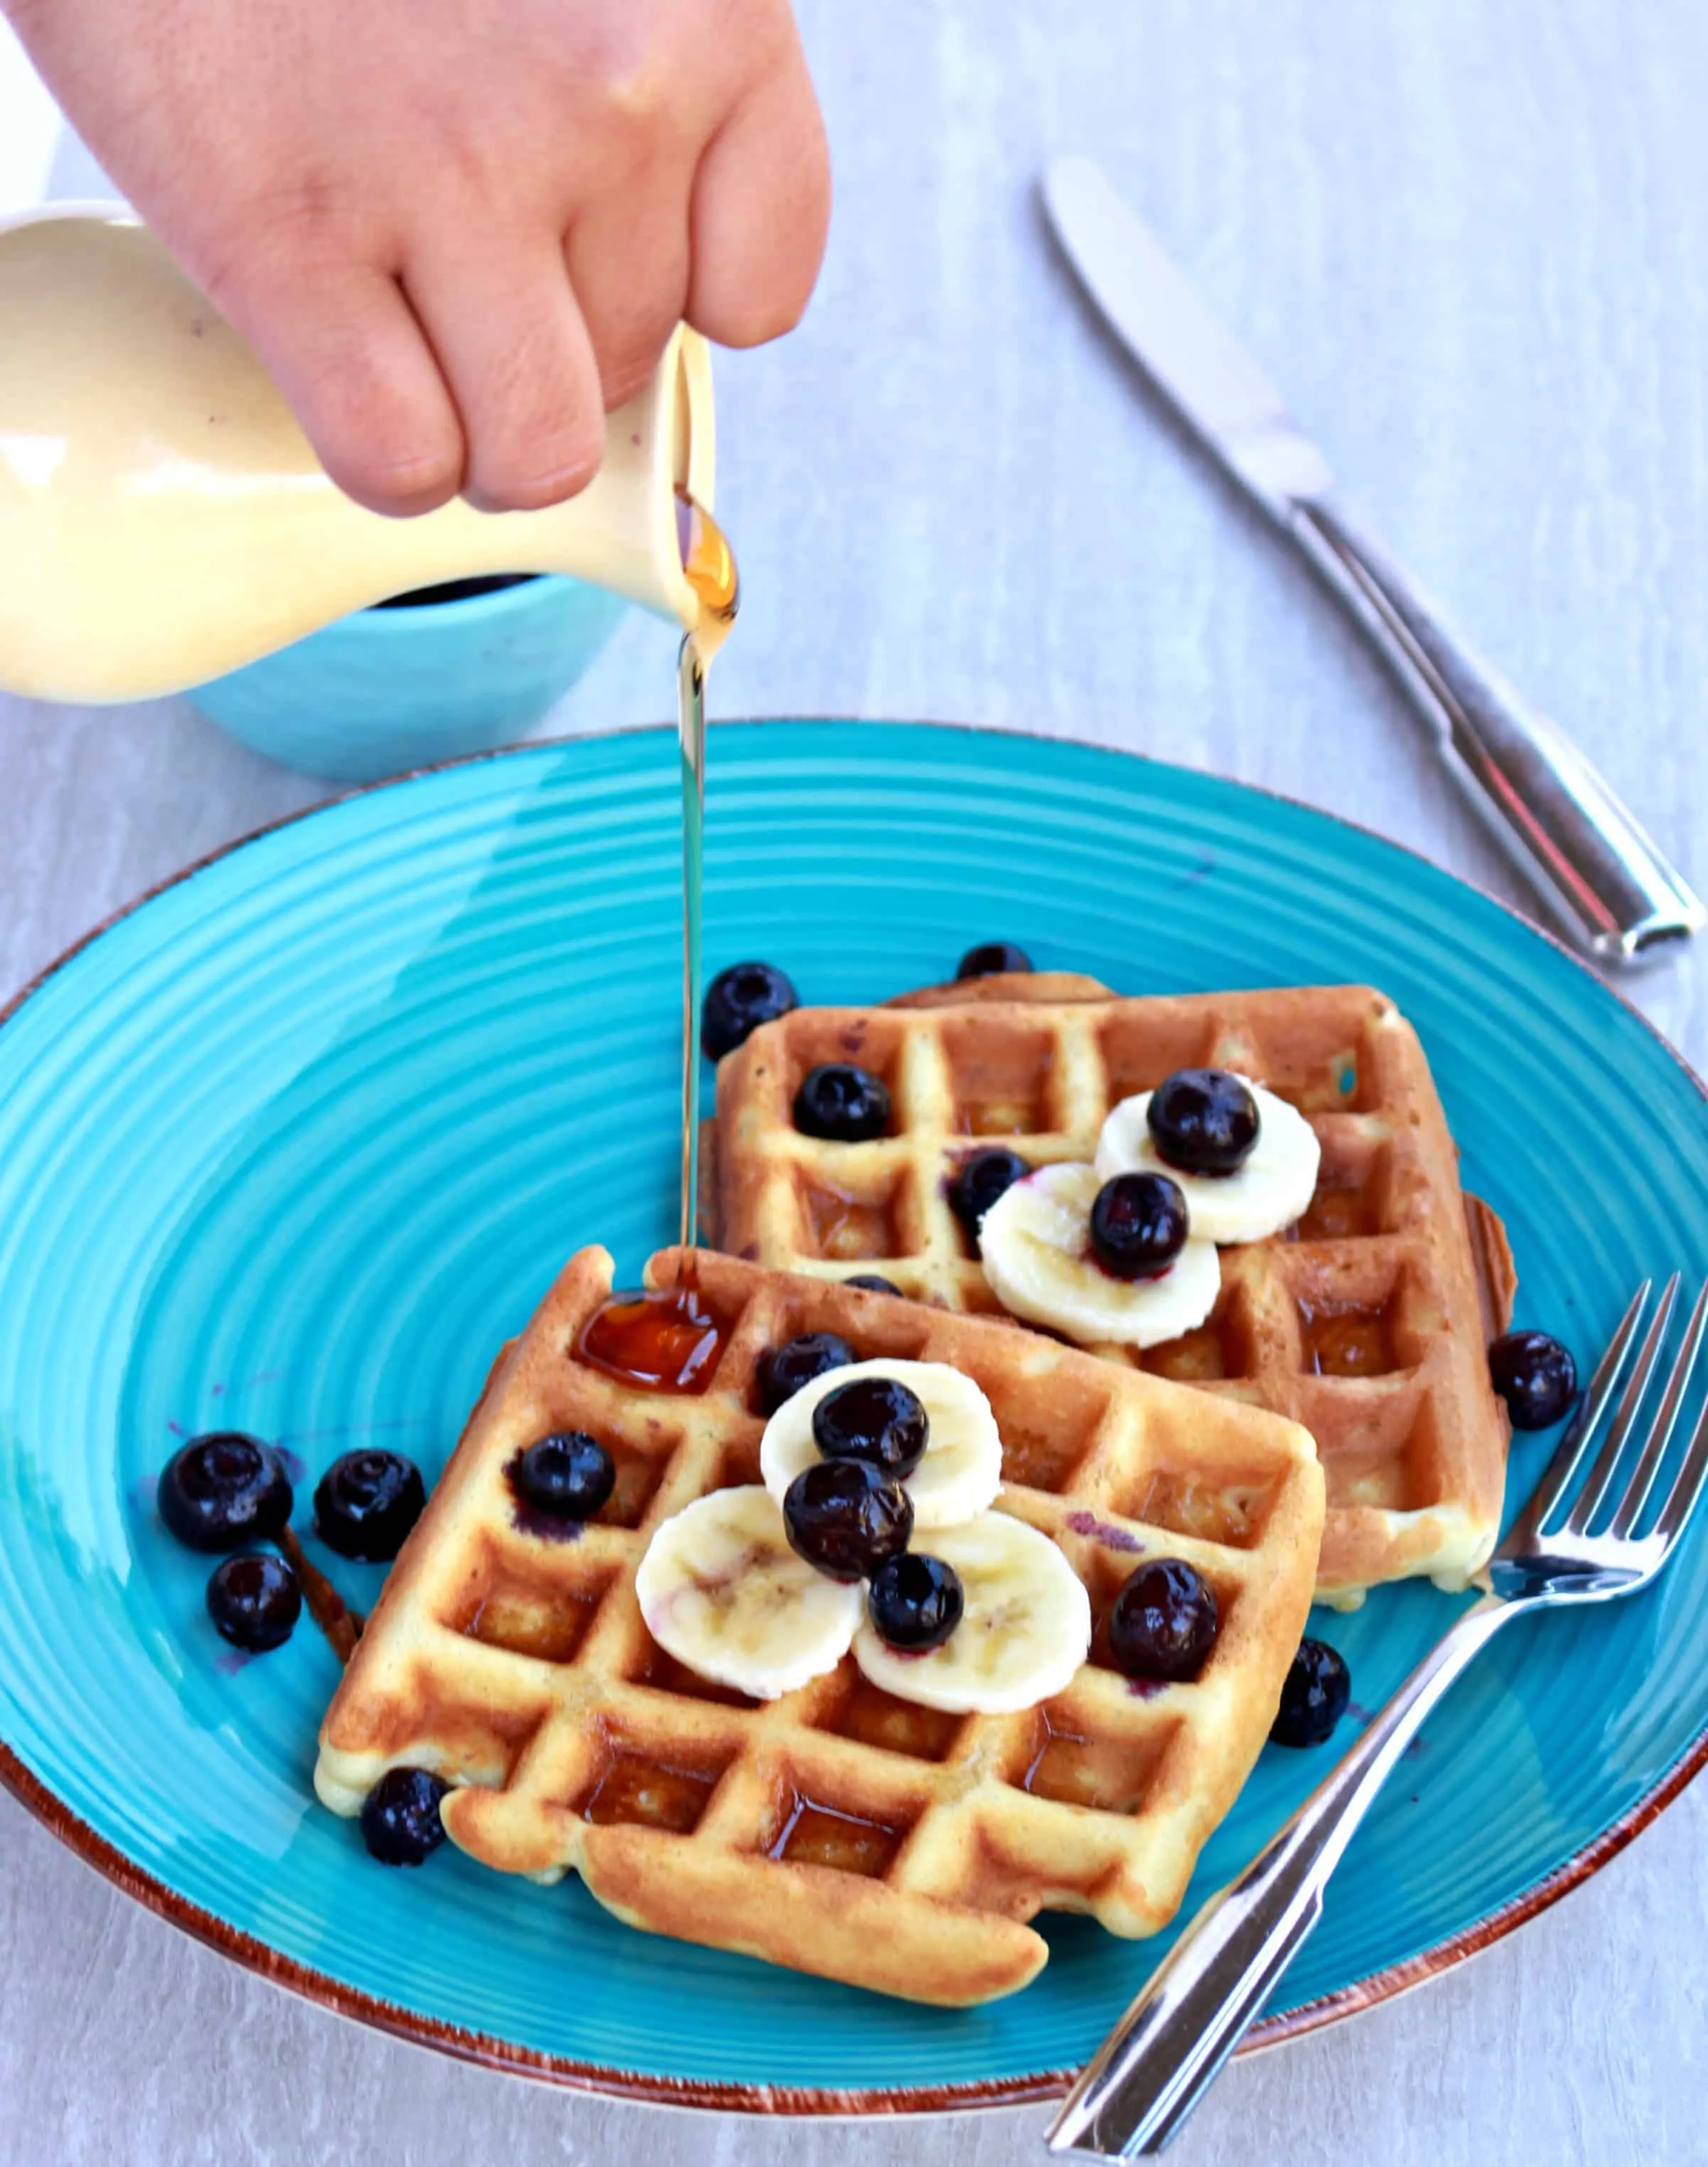 Pouring syrup on Waffles